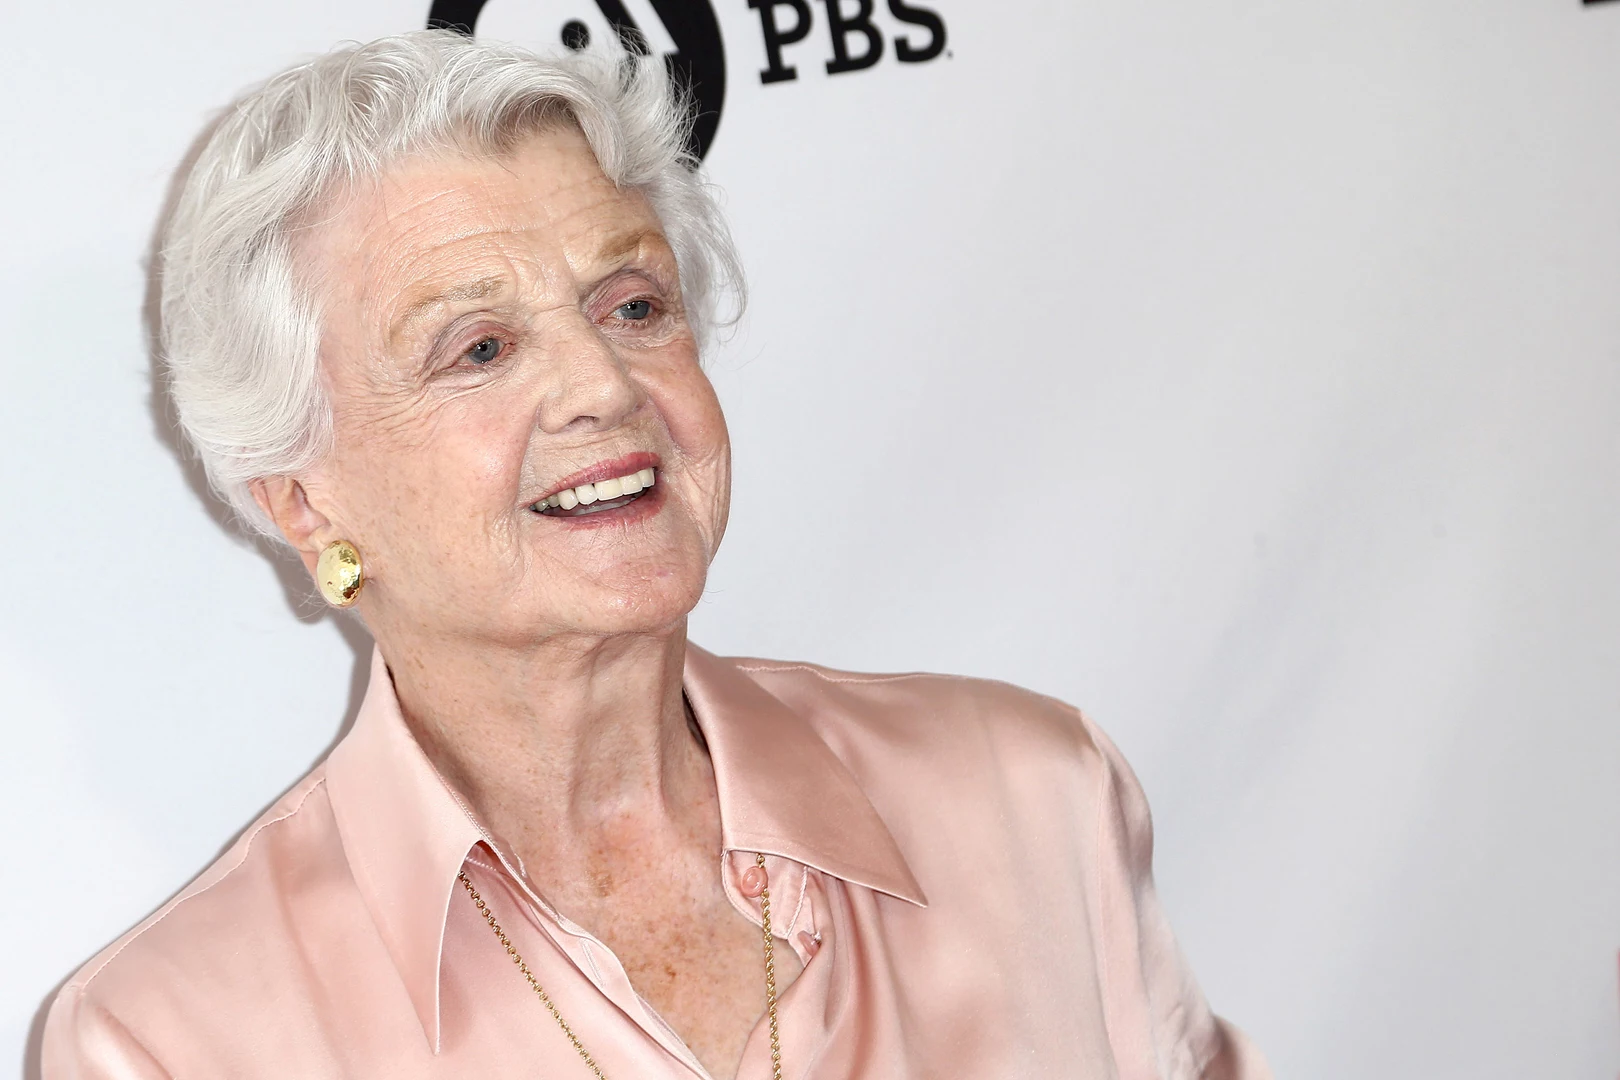 Murder She Wrote Actress Angela Lansbury Dead At 96 Networknews 